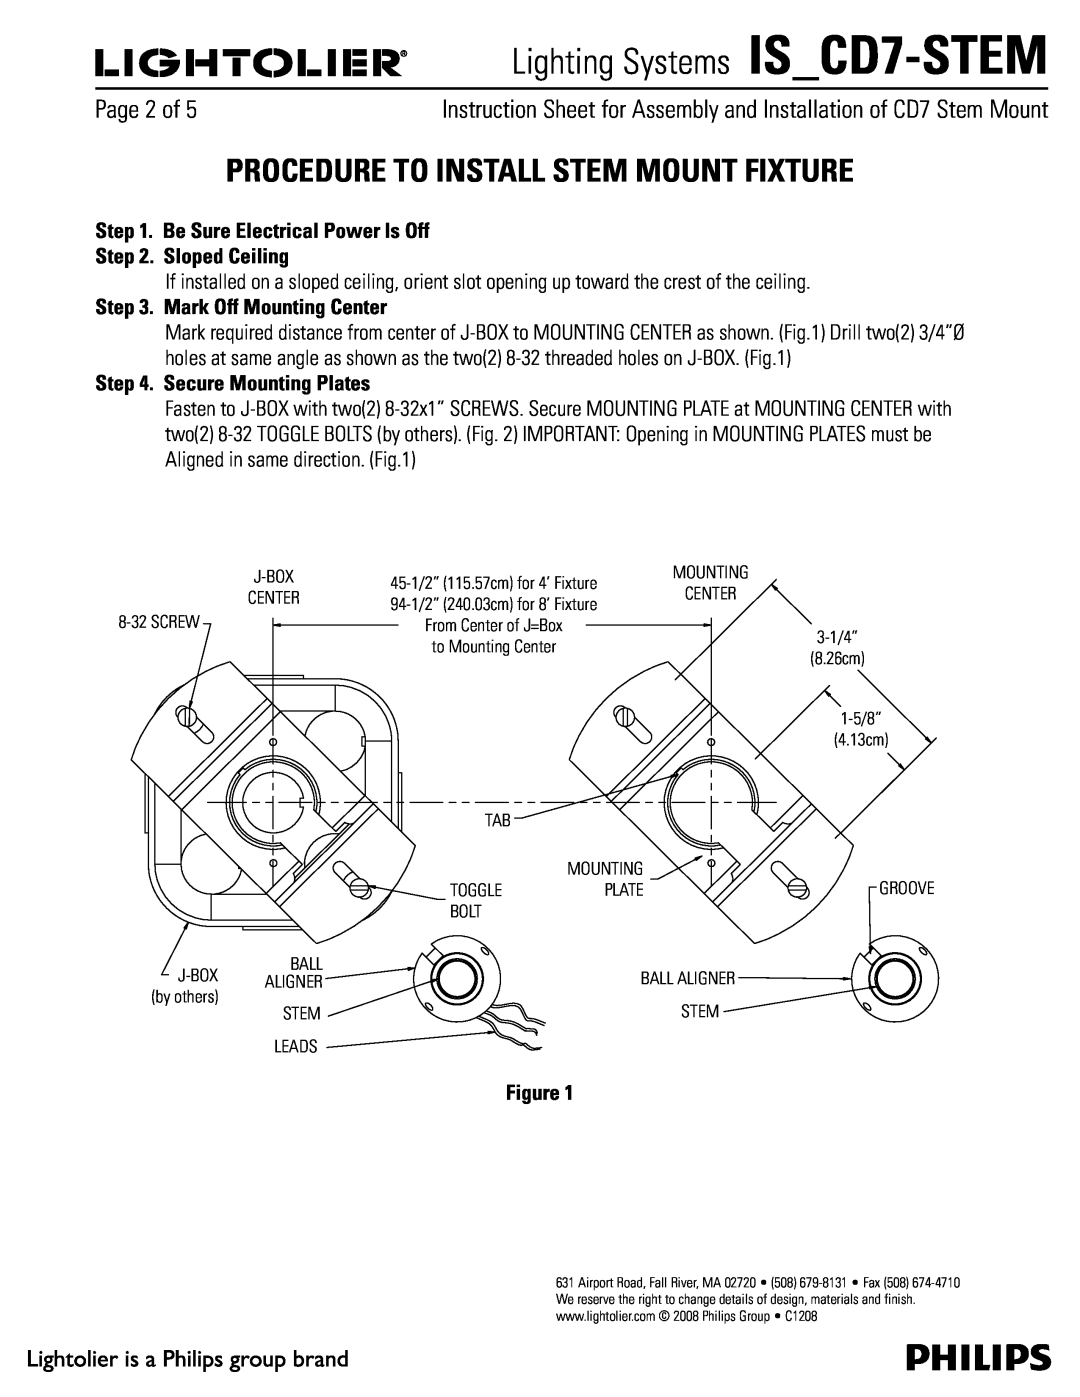 Lightolier IS_CD7-STEM manual Procedure To Install Stem Mount Fixture, Be Sure Electrical Power Is Off, Sloped Ceiling 